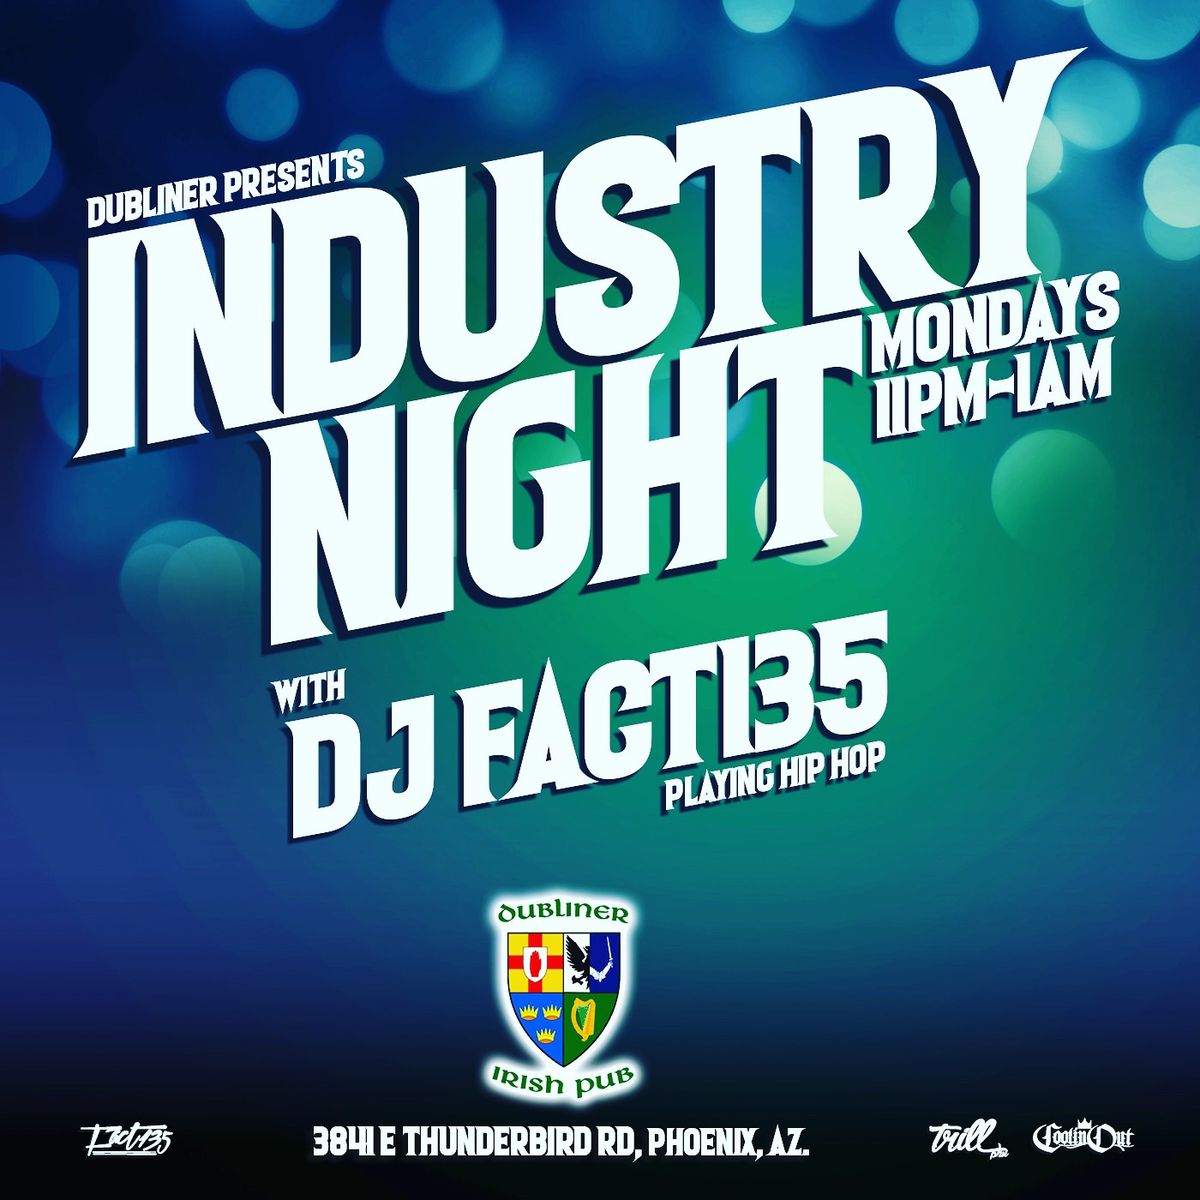 Industry Night with DJ Fact135